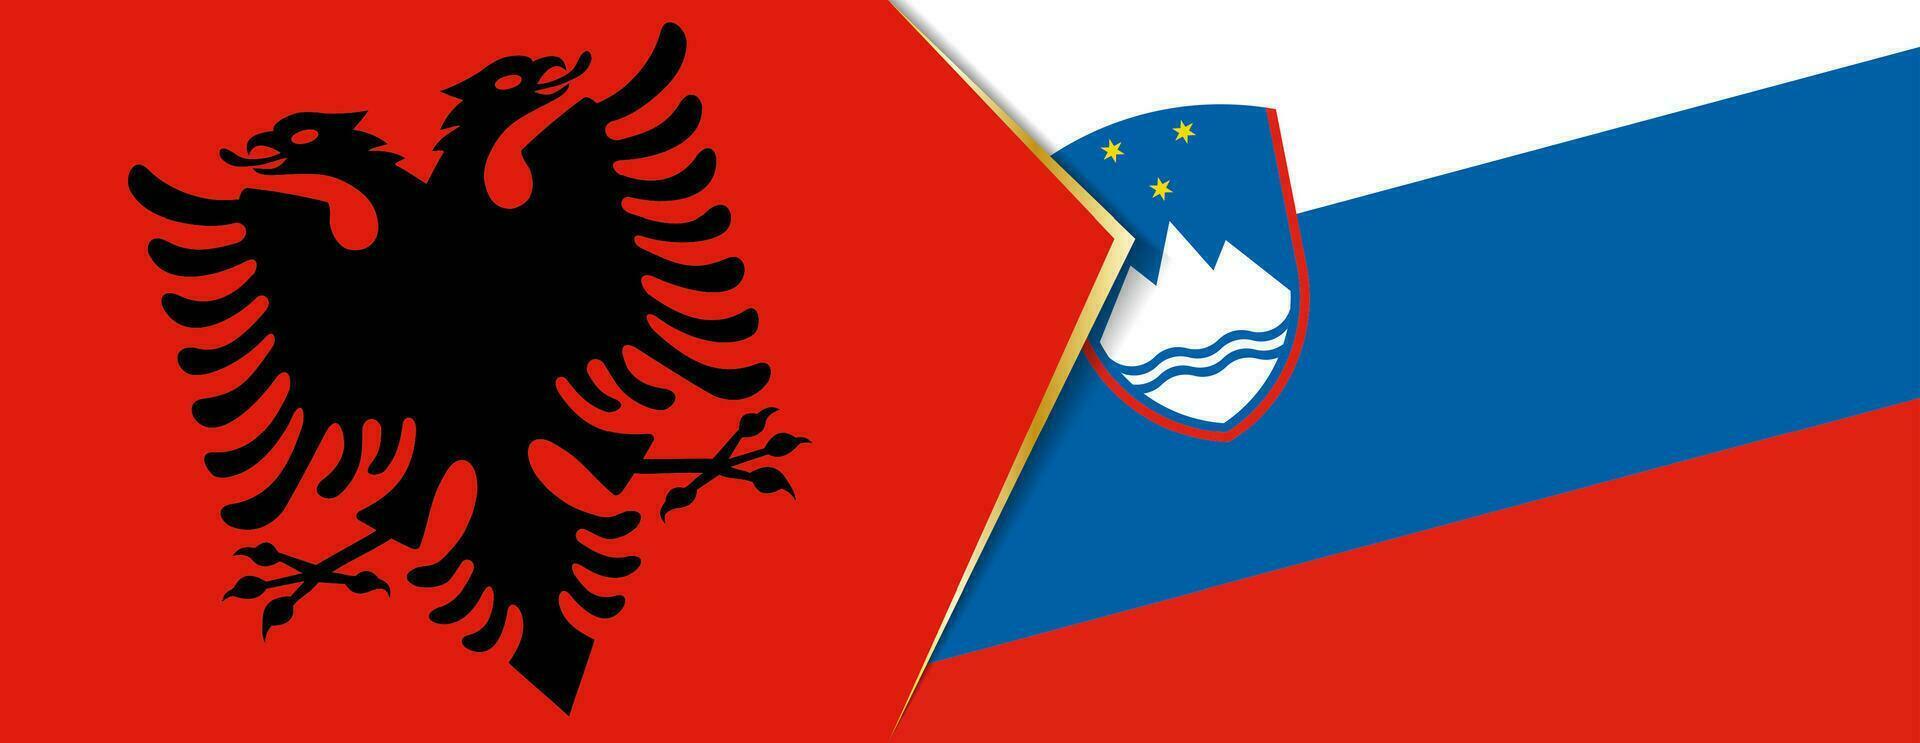 Albania and Slovenia flags, two vector flags.